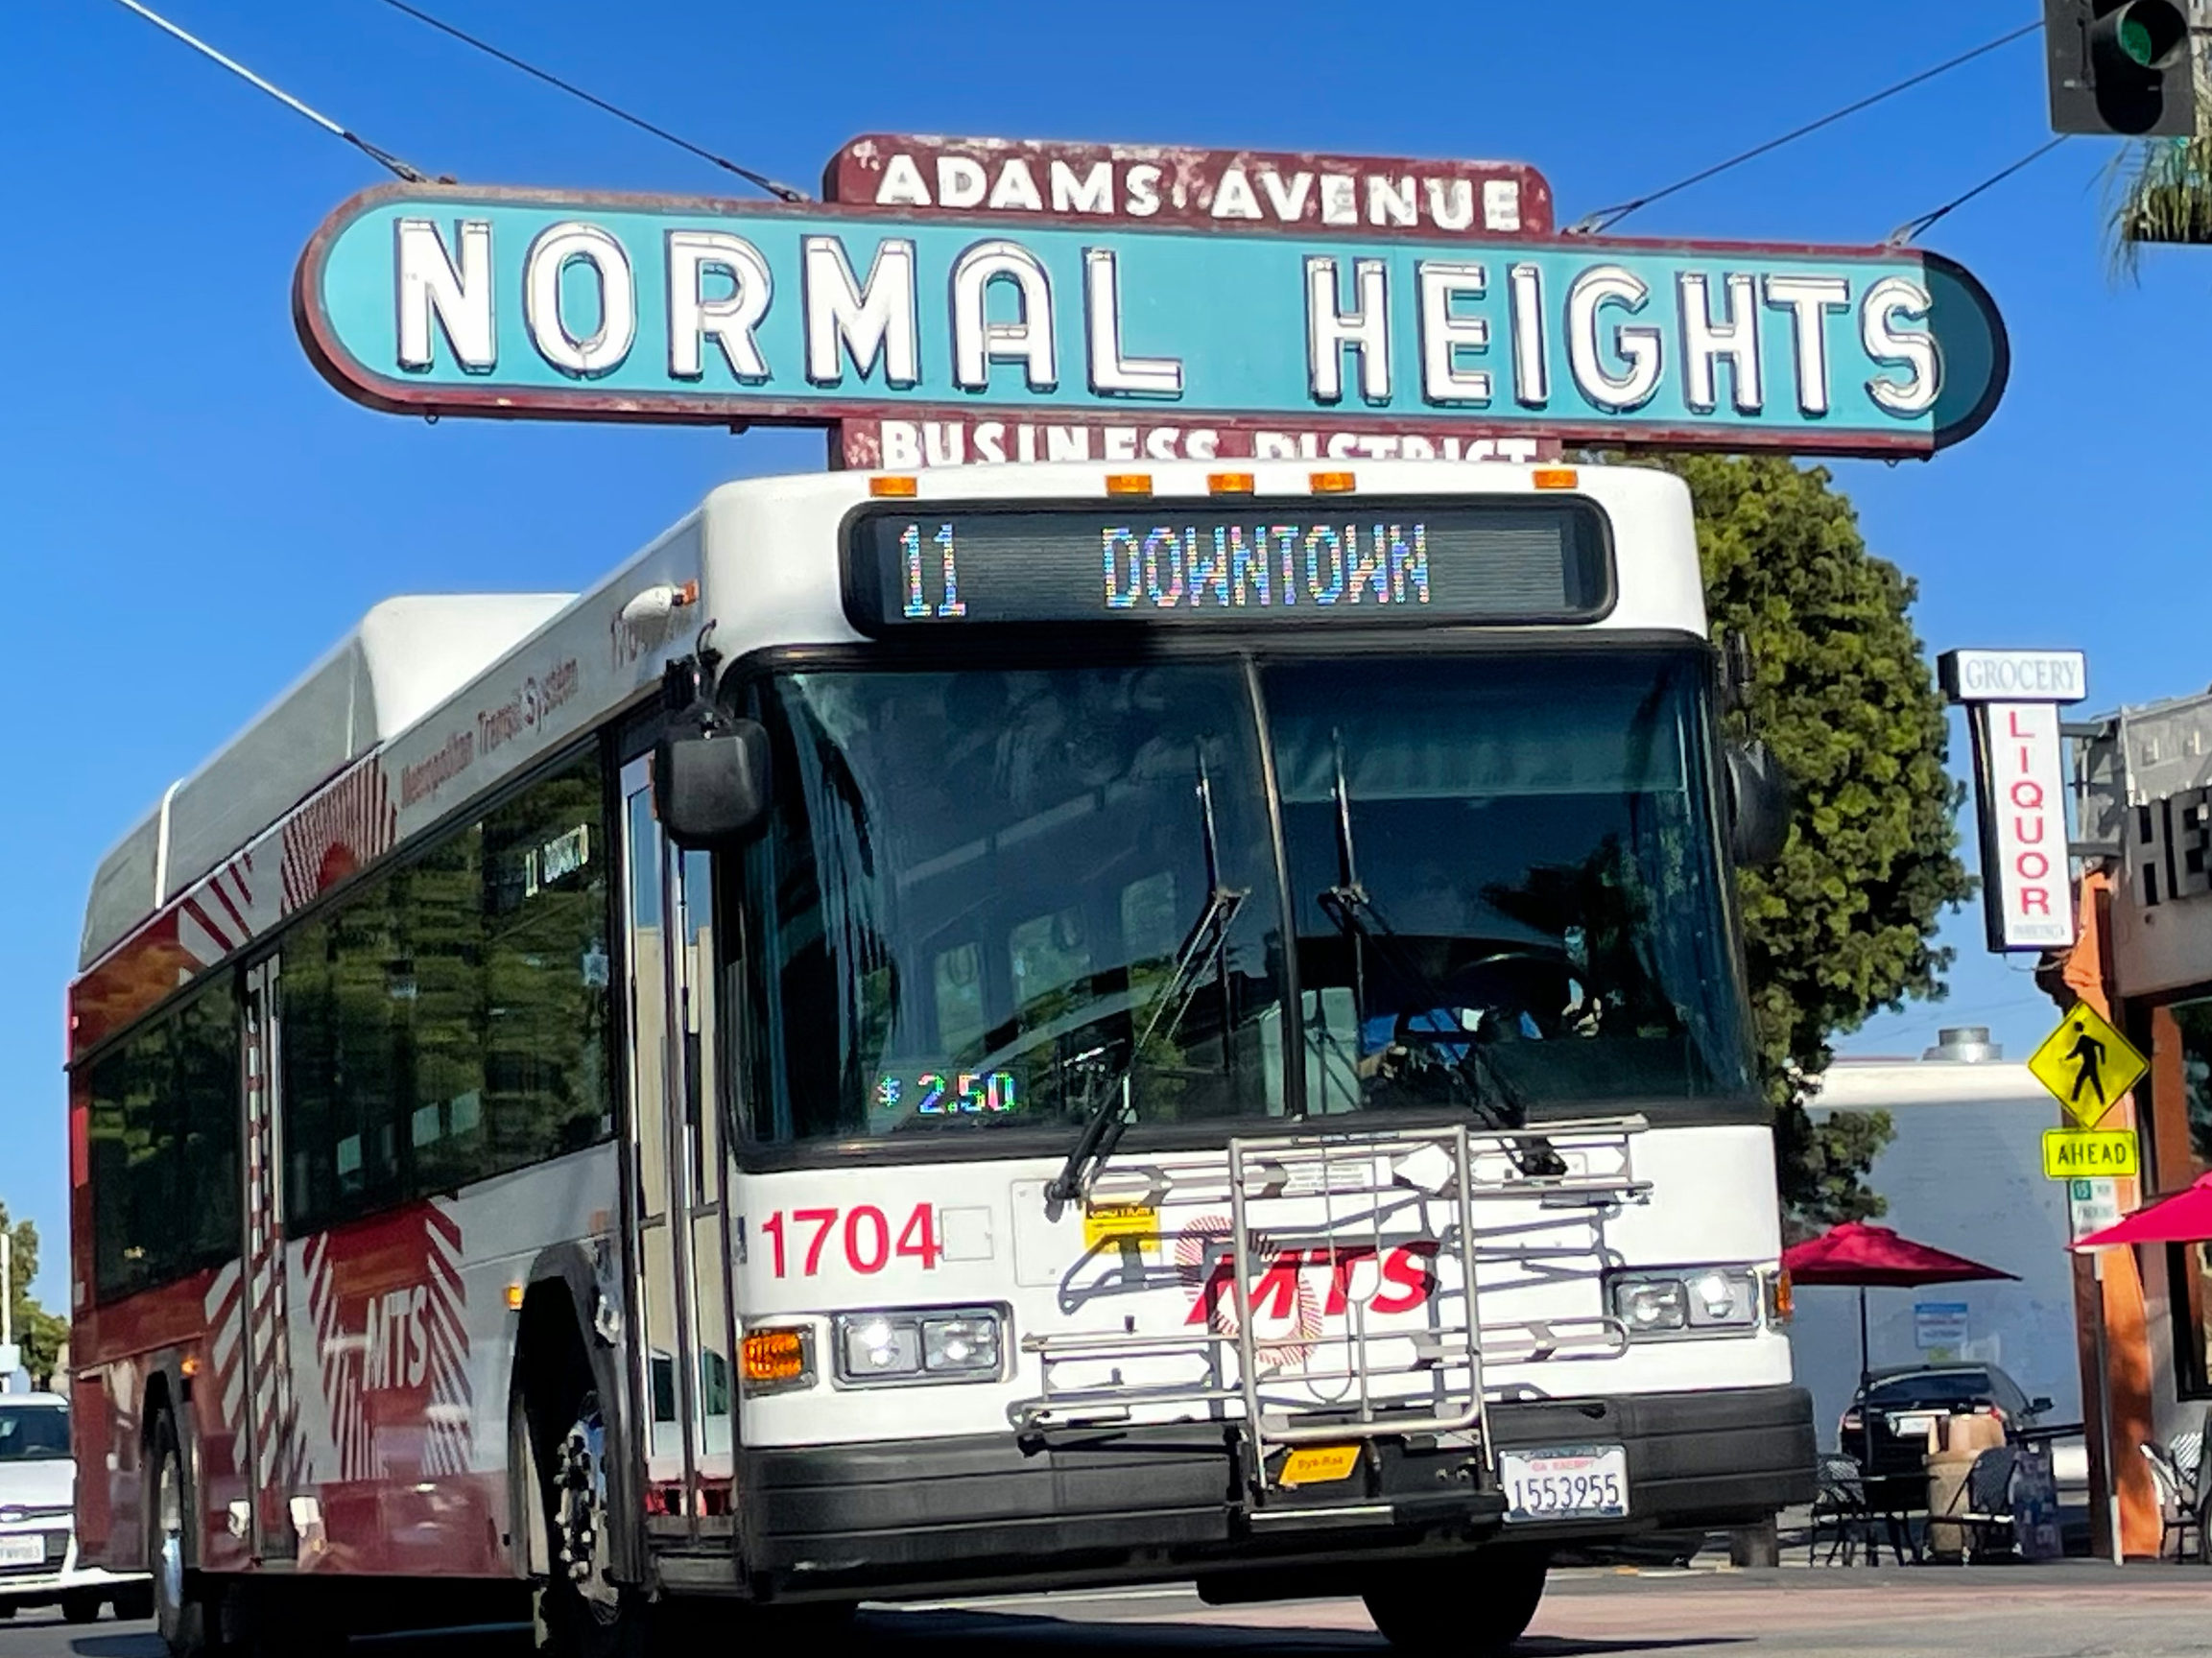 Number 11 bus in front of Normal Heights sign